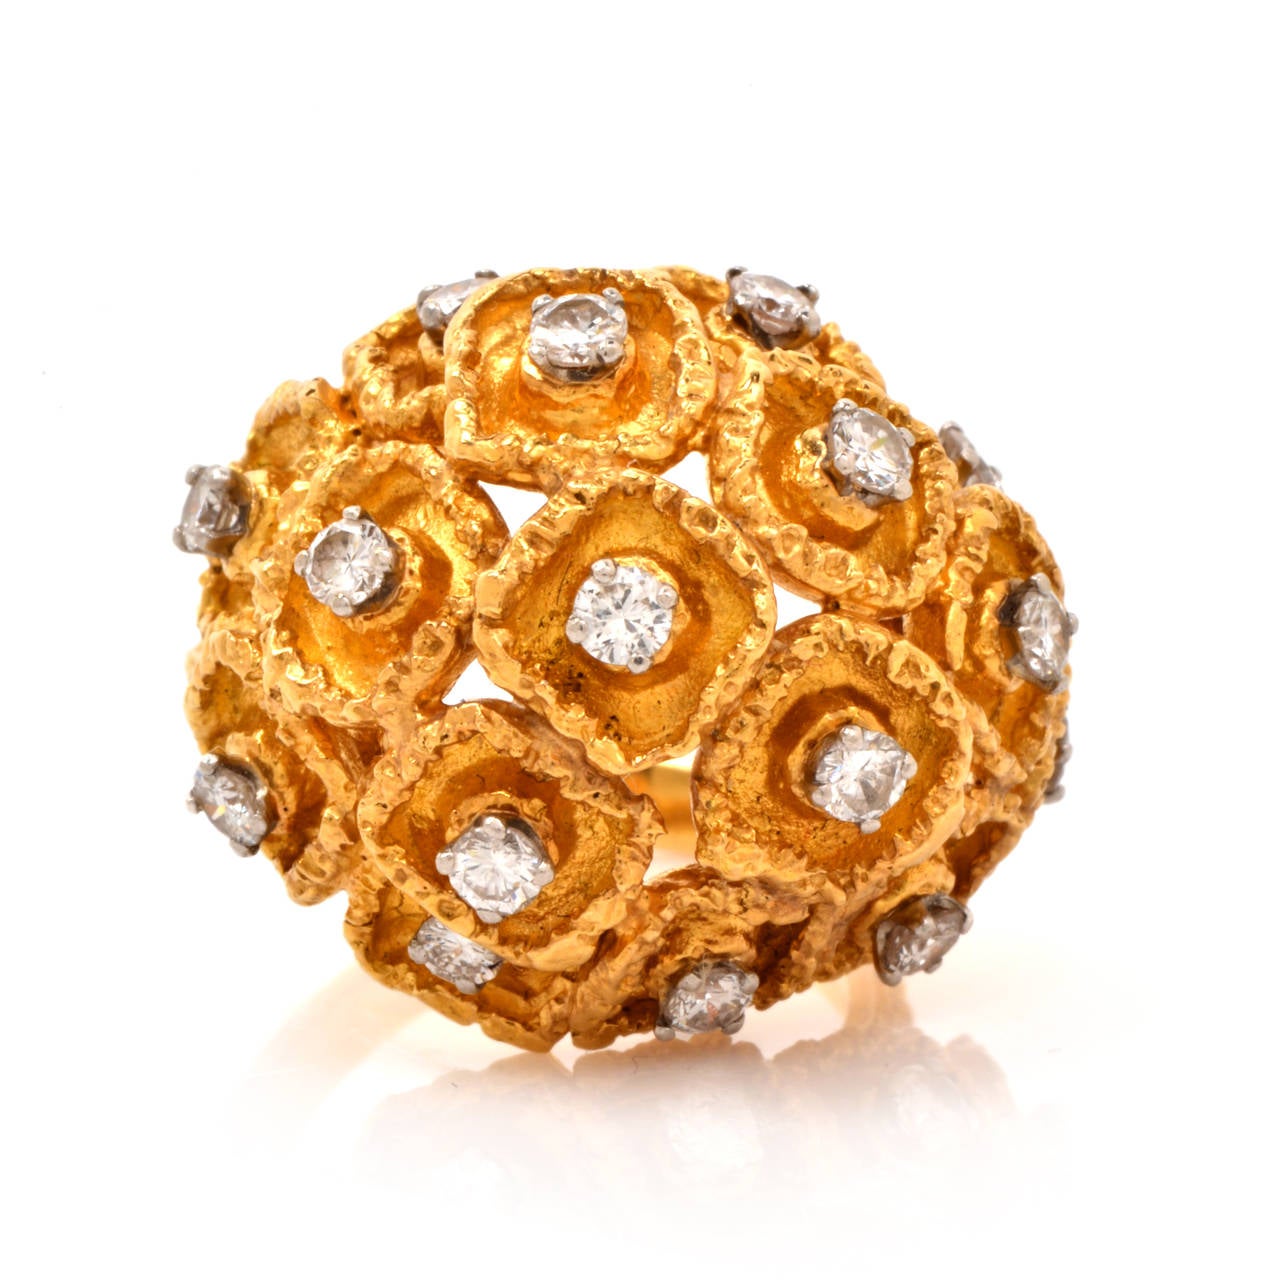 This cocktail ring of captivating design is crafted in solid 18K yellow gold weighing approximately 16.8 grams and measuring 18mm high. Designed as a diamond-adorned  dome plaque, comprising an assemblage of delicate floral profiles, this cocktail